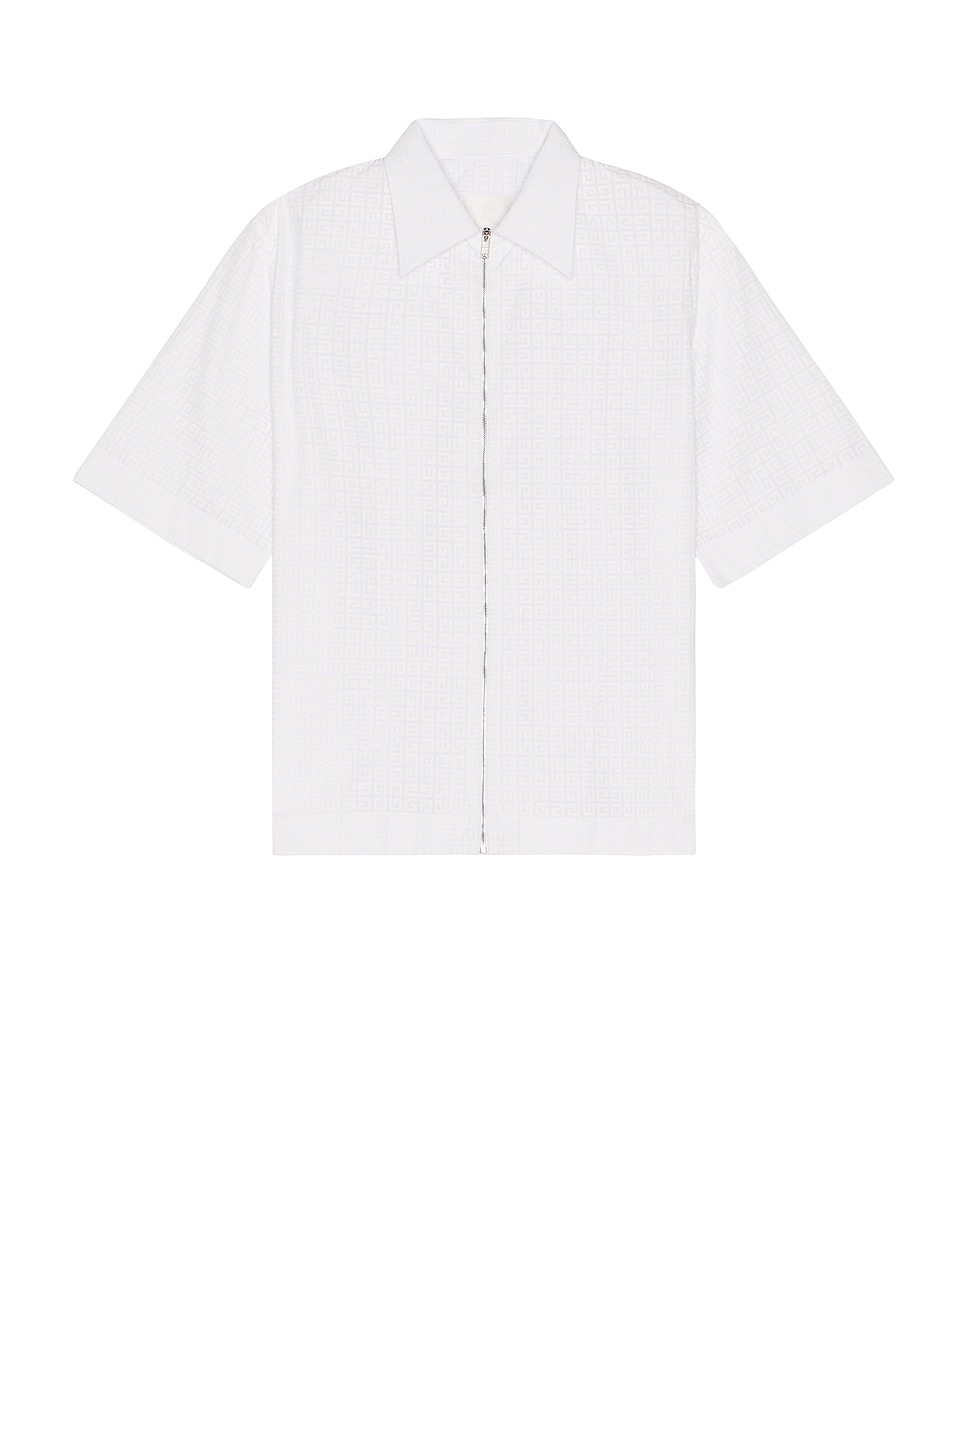 Image 1 of Givenchy Short Sleeve Boxy Fit Zipped Shirt in White